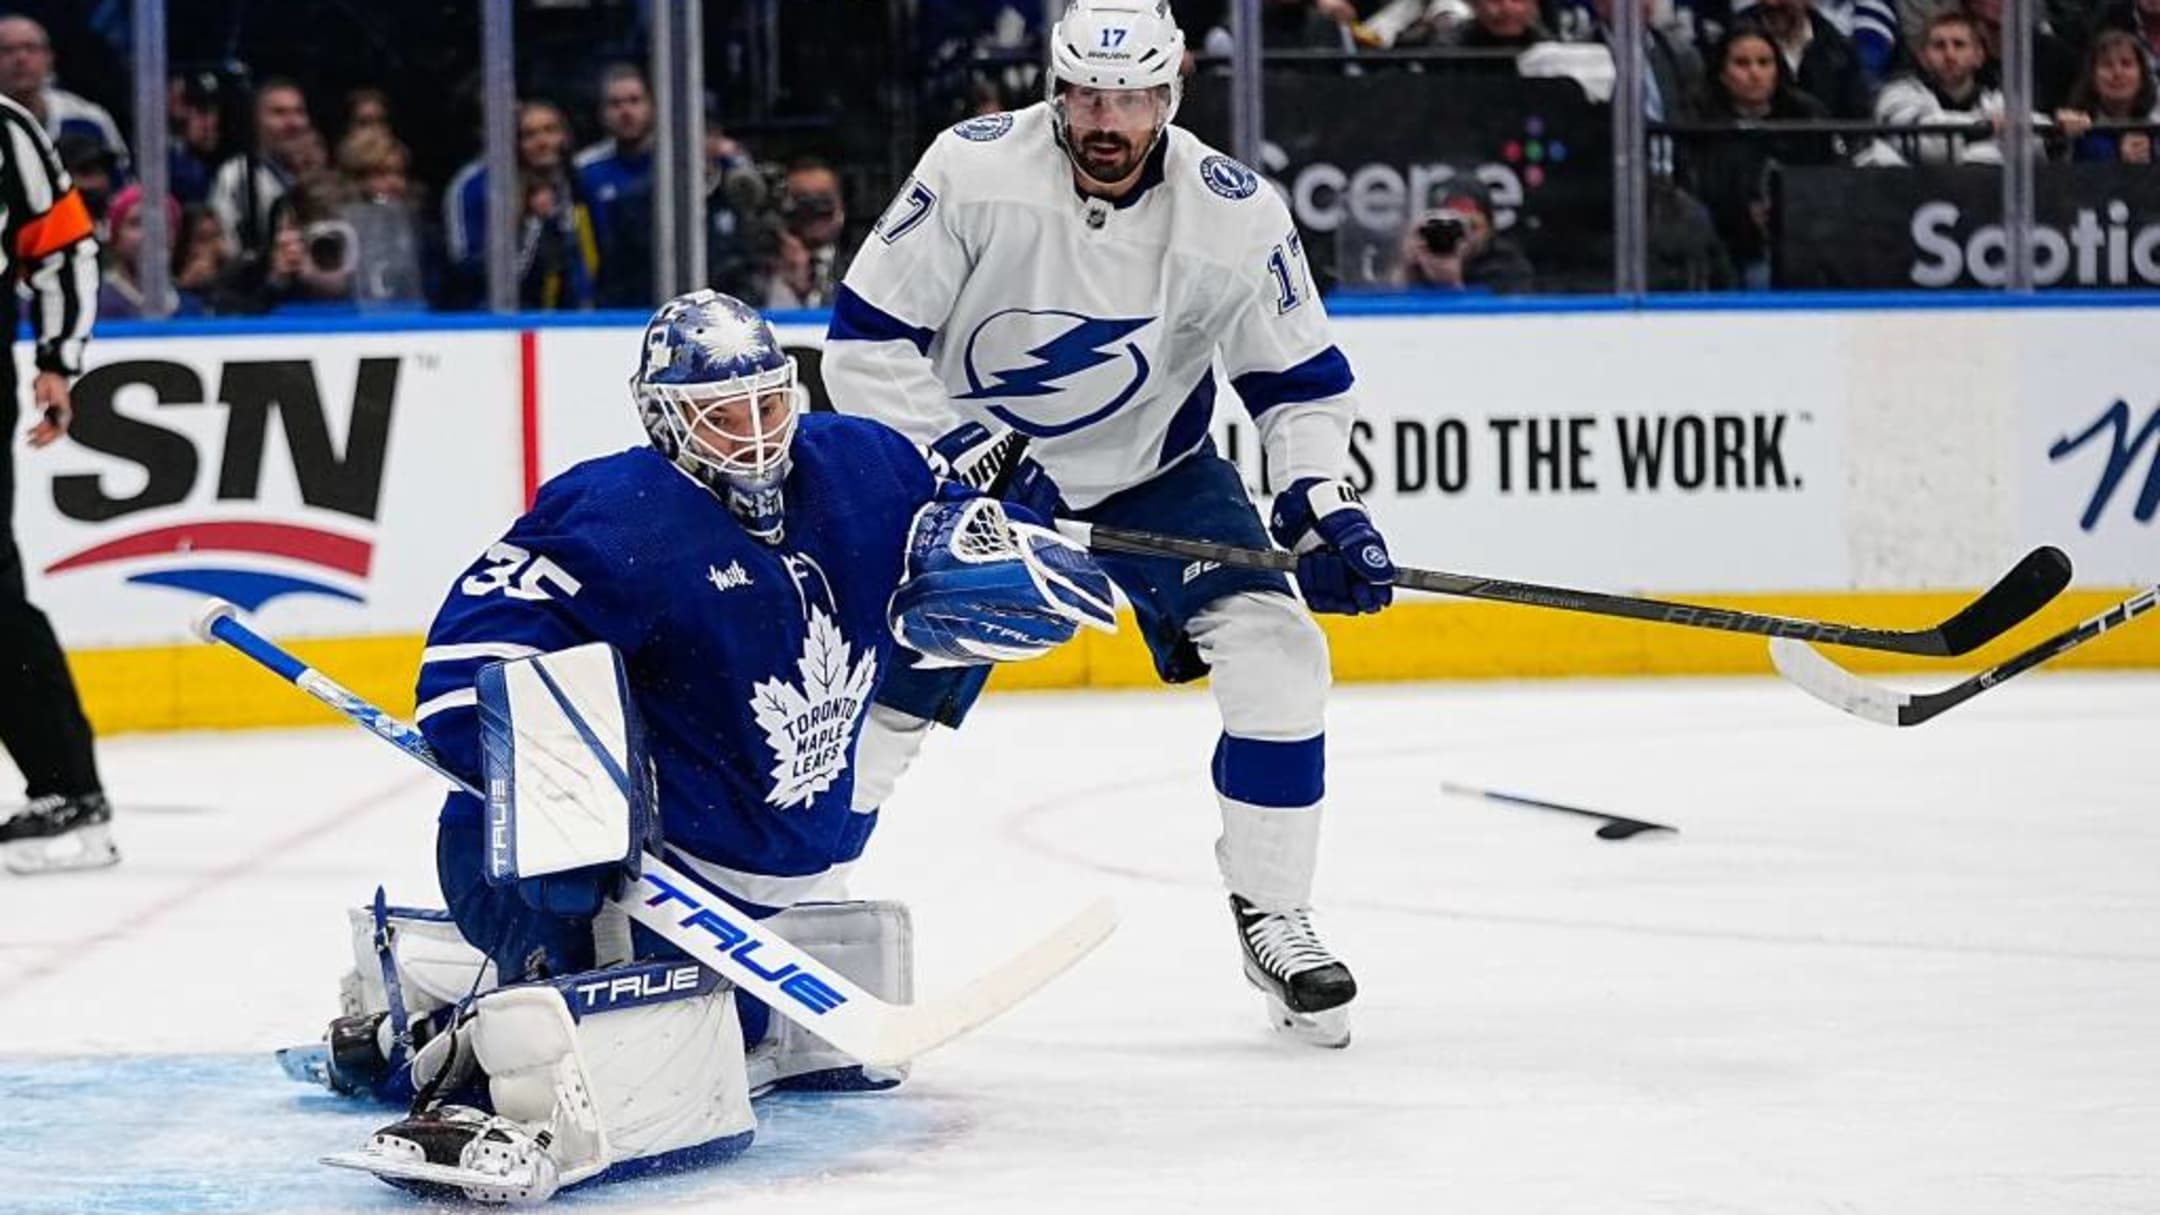 Watch Toronto Maple Leafs vs Tampa Bay Lightning in the NHL Playoffs First Round (Game 2) Free Live Stream, TV Channel, Start Time Yardbarker